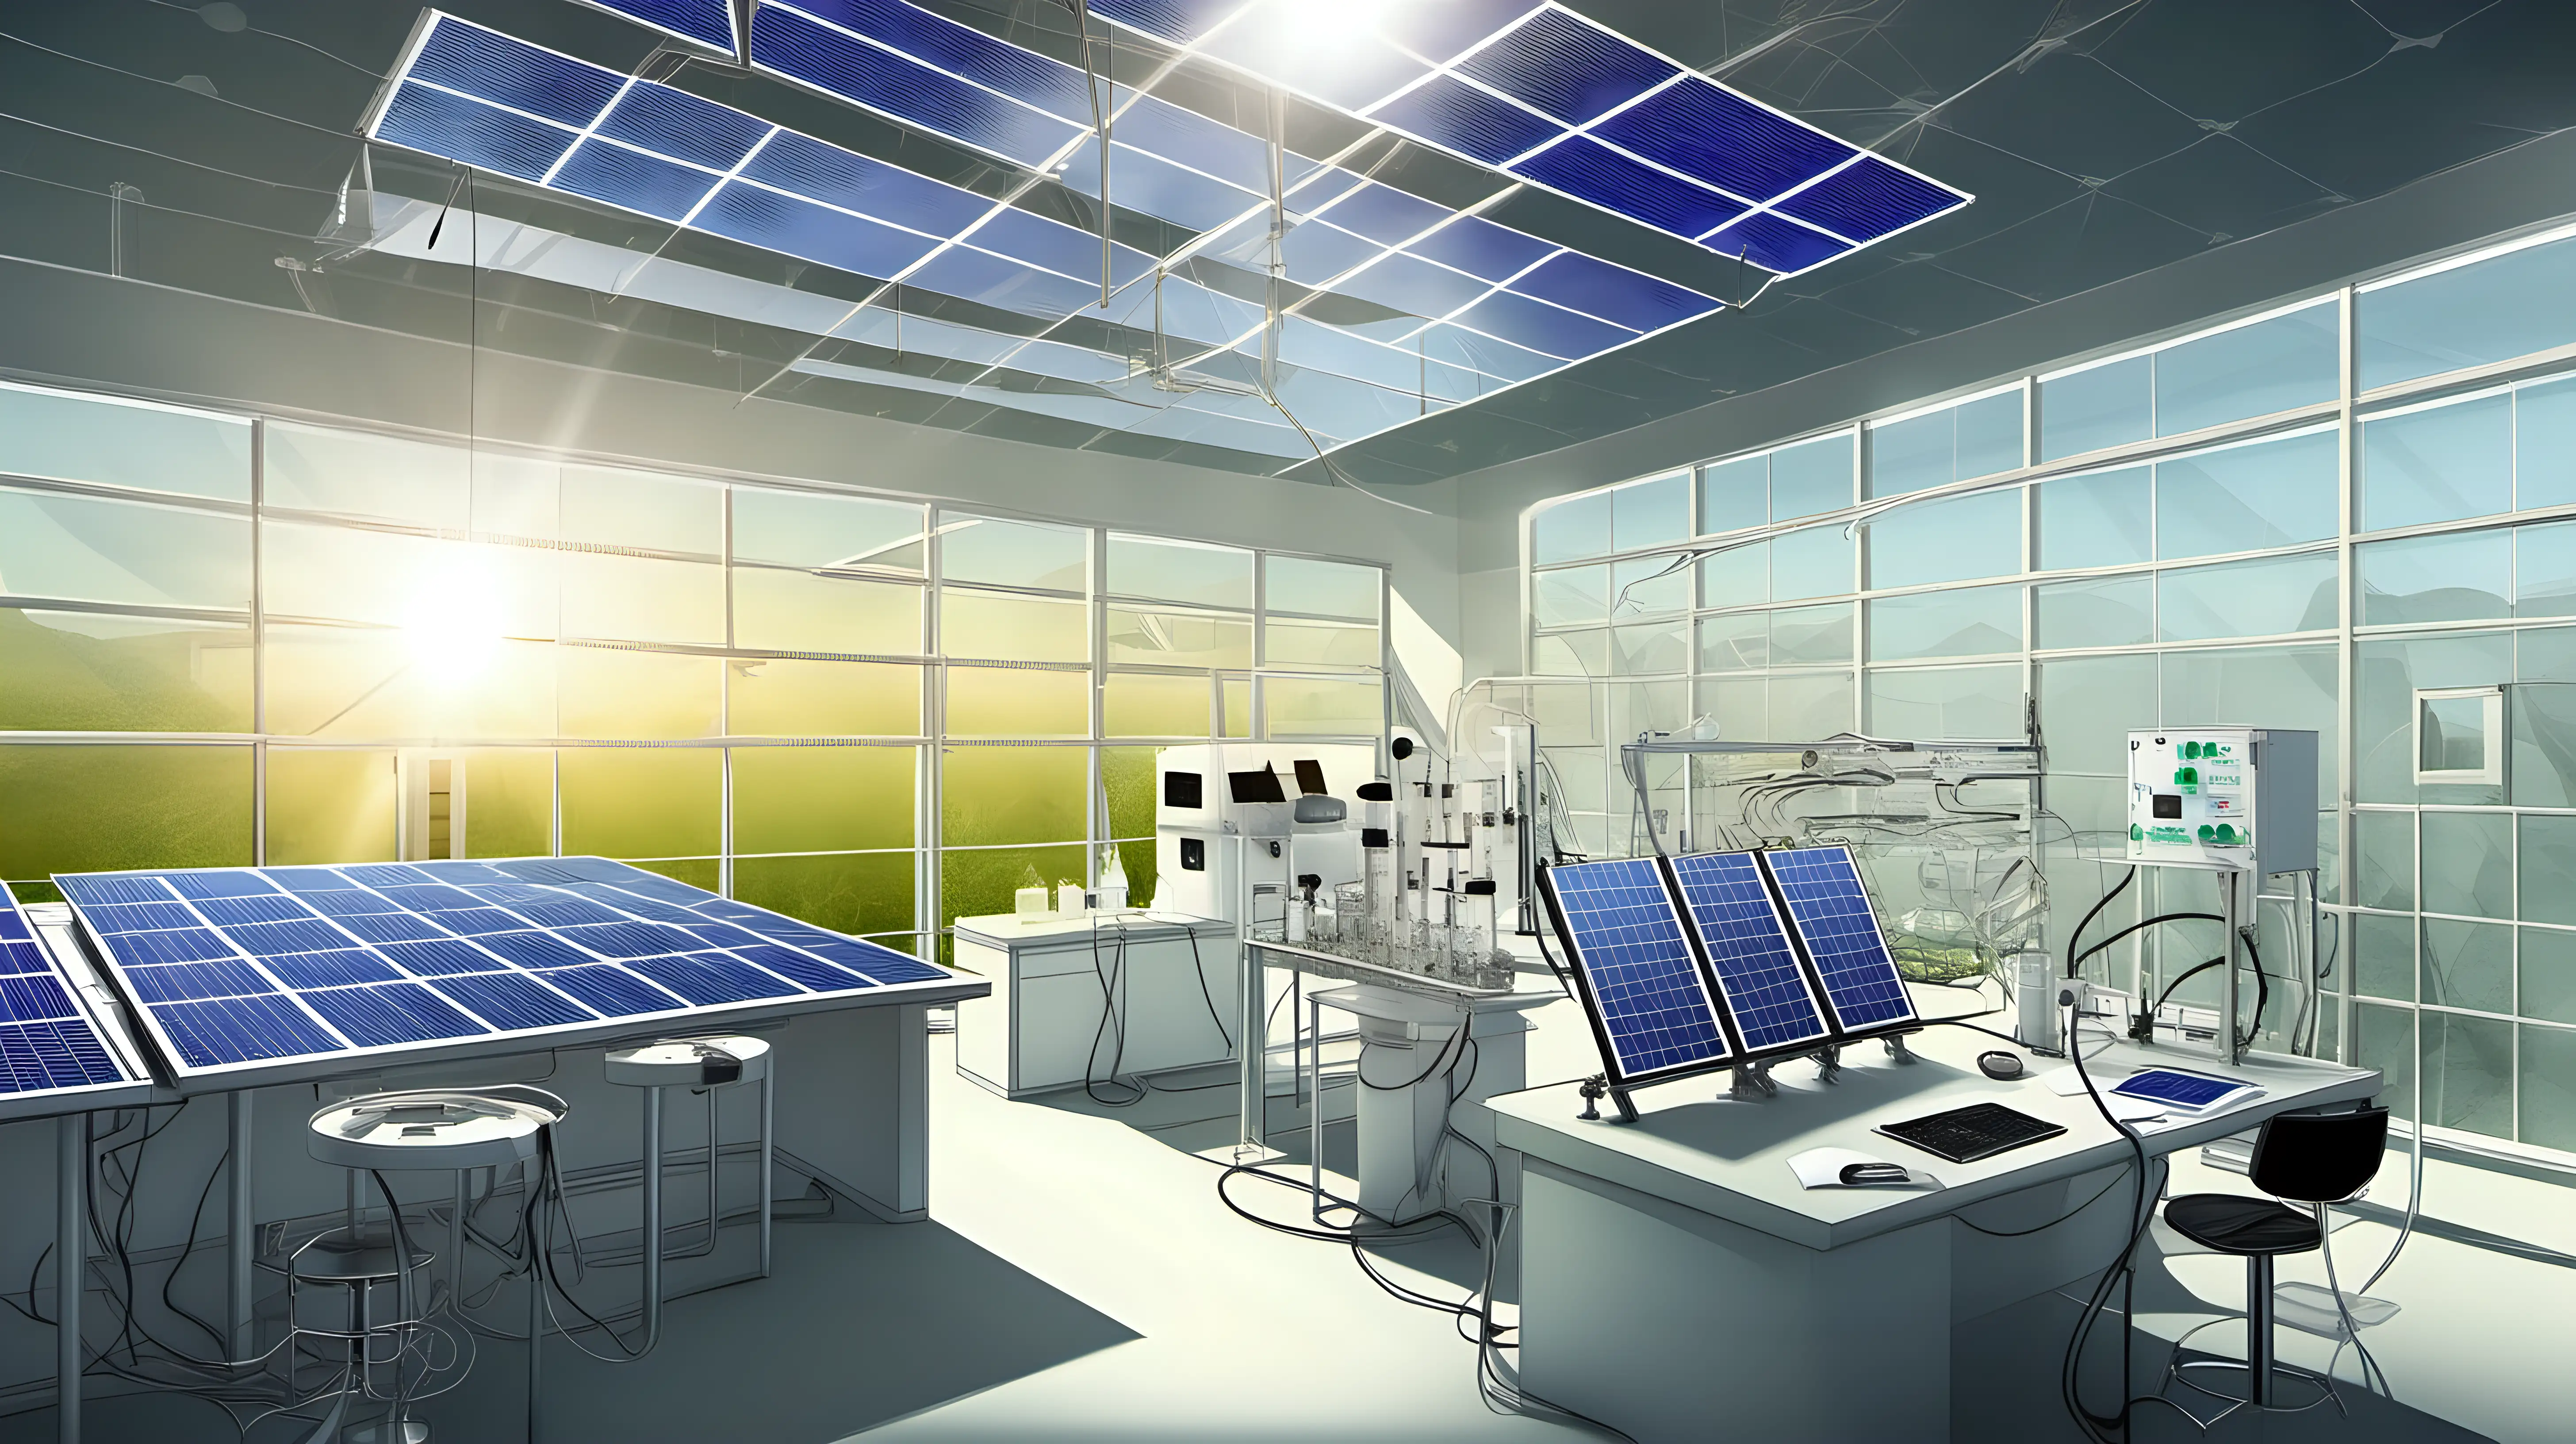 "Craft an illustration of a research laboratory developing breakthroughs in next-generation solar technology, highlighting advancements in efficiency and aesthetics."